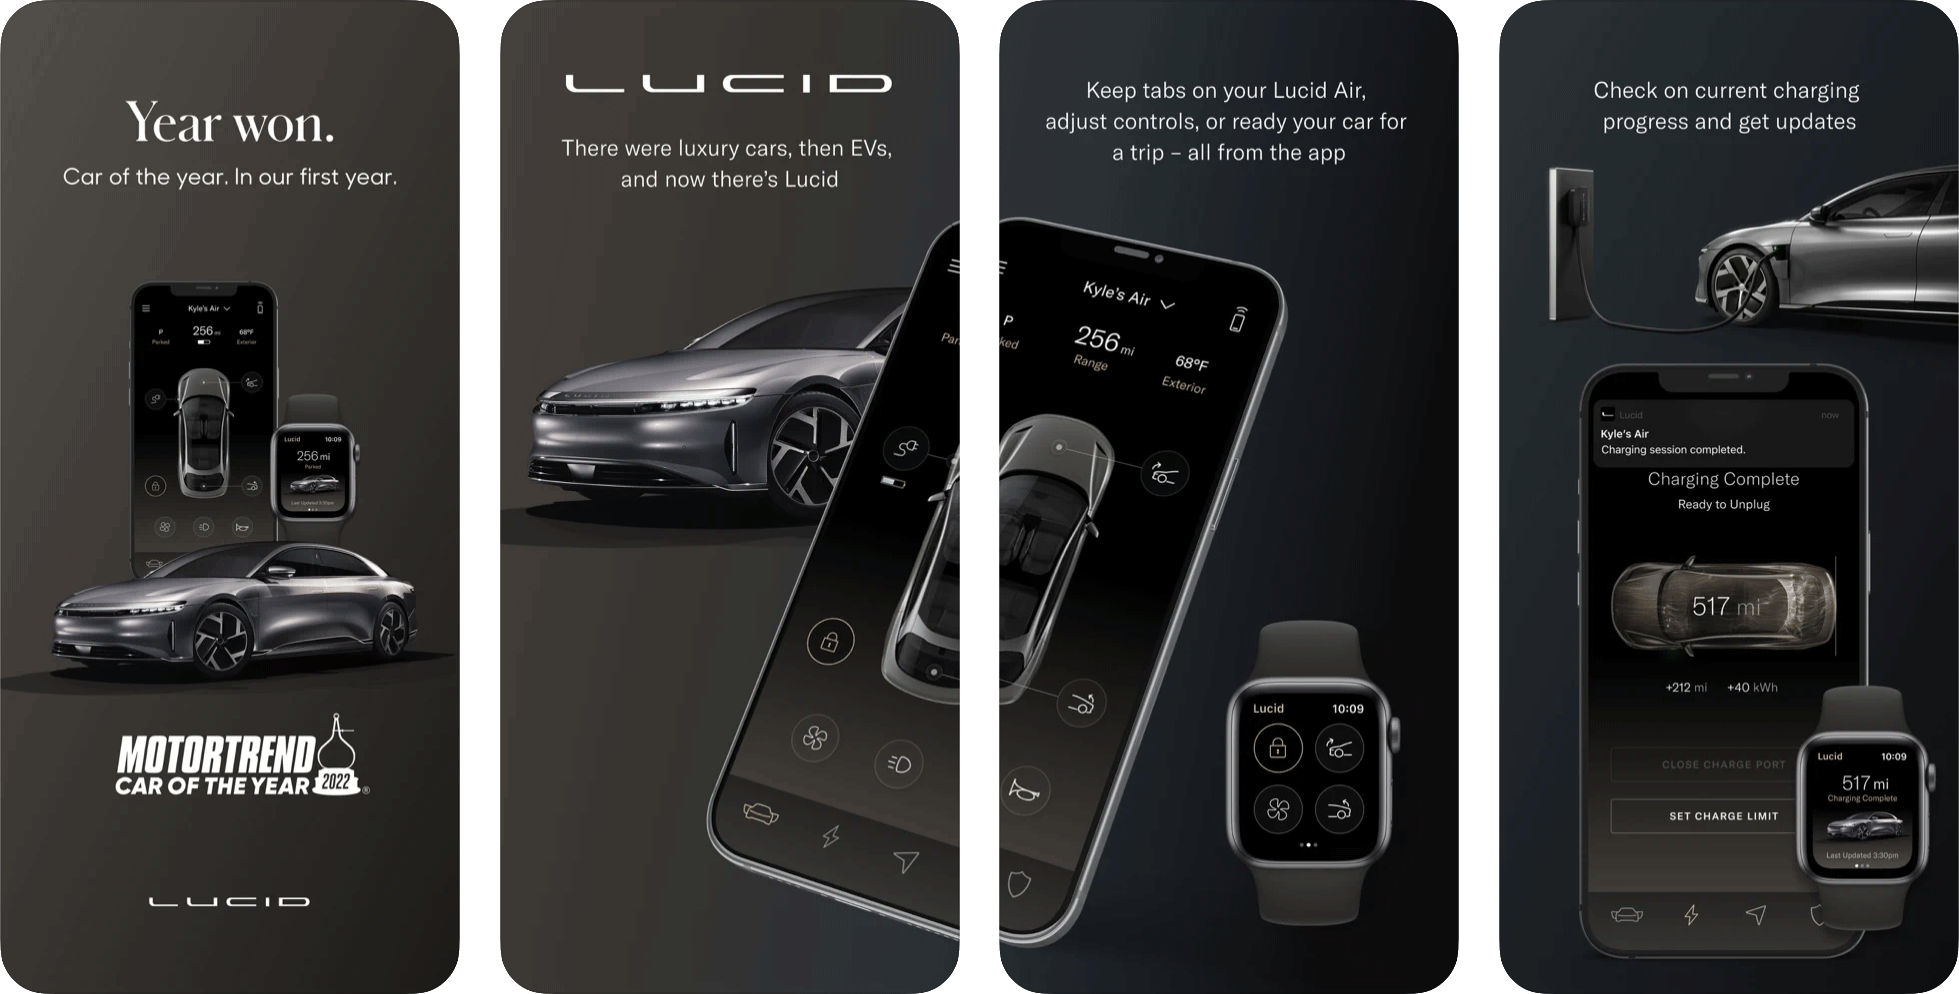 Lucid Mobile App for iOS and Android Updated with Charging Updates, Apple Watch Siri Commands and more